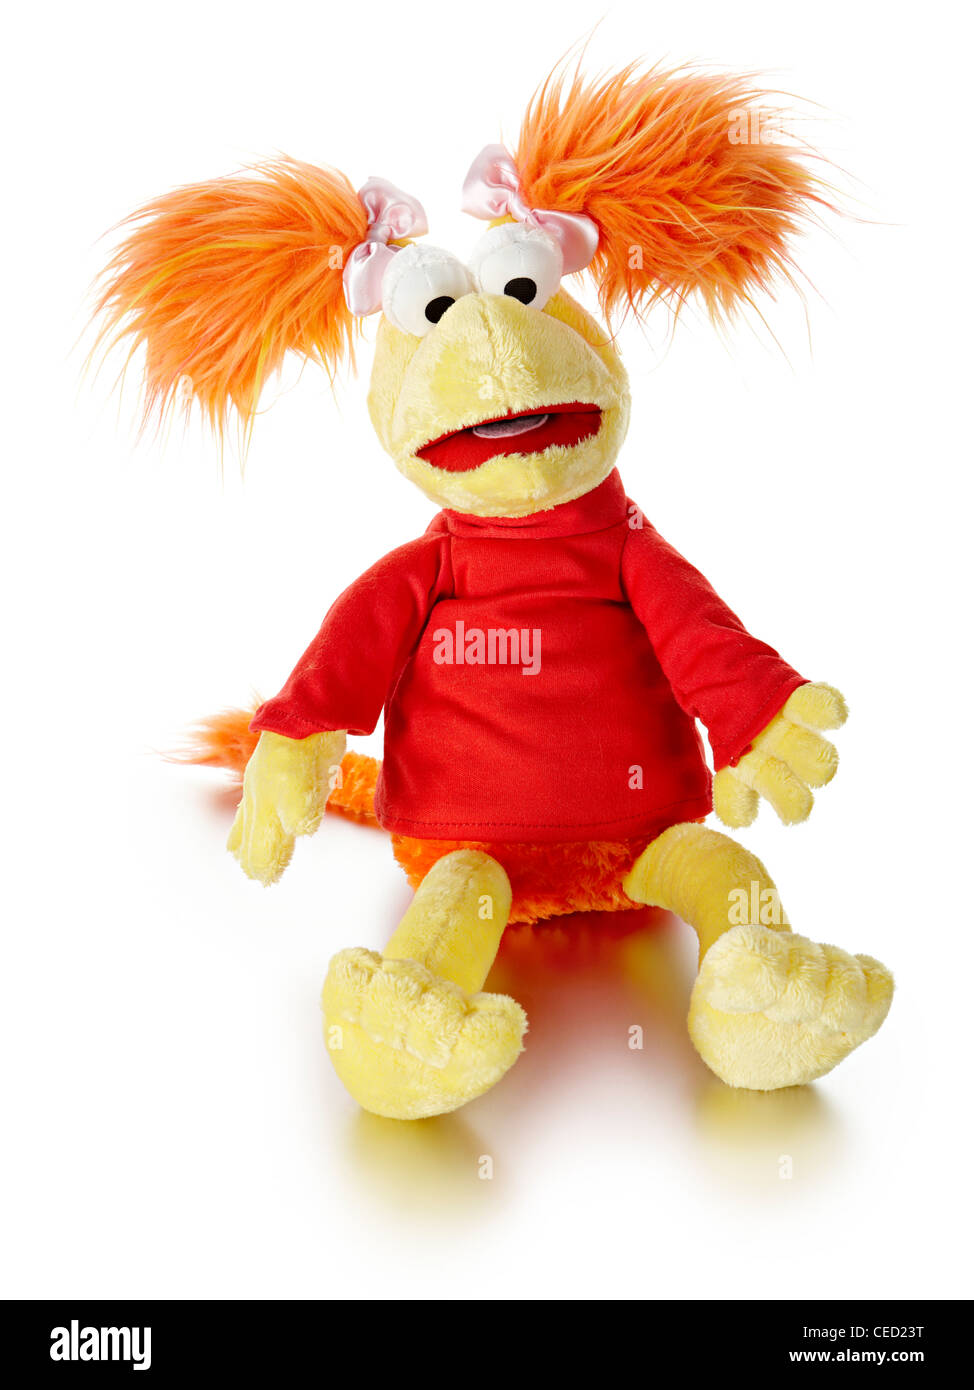 Fraggle Rock character soft toy Stock Photo